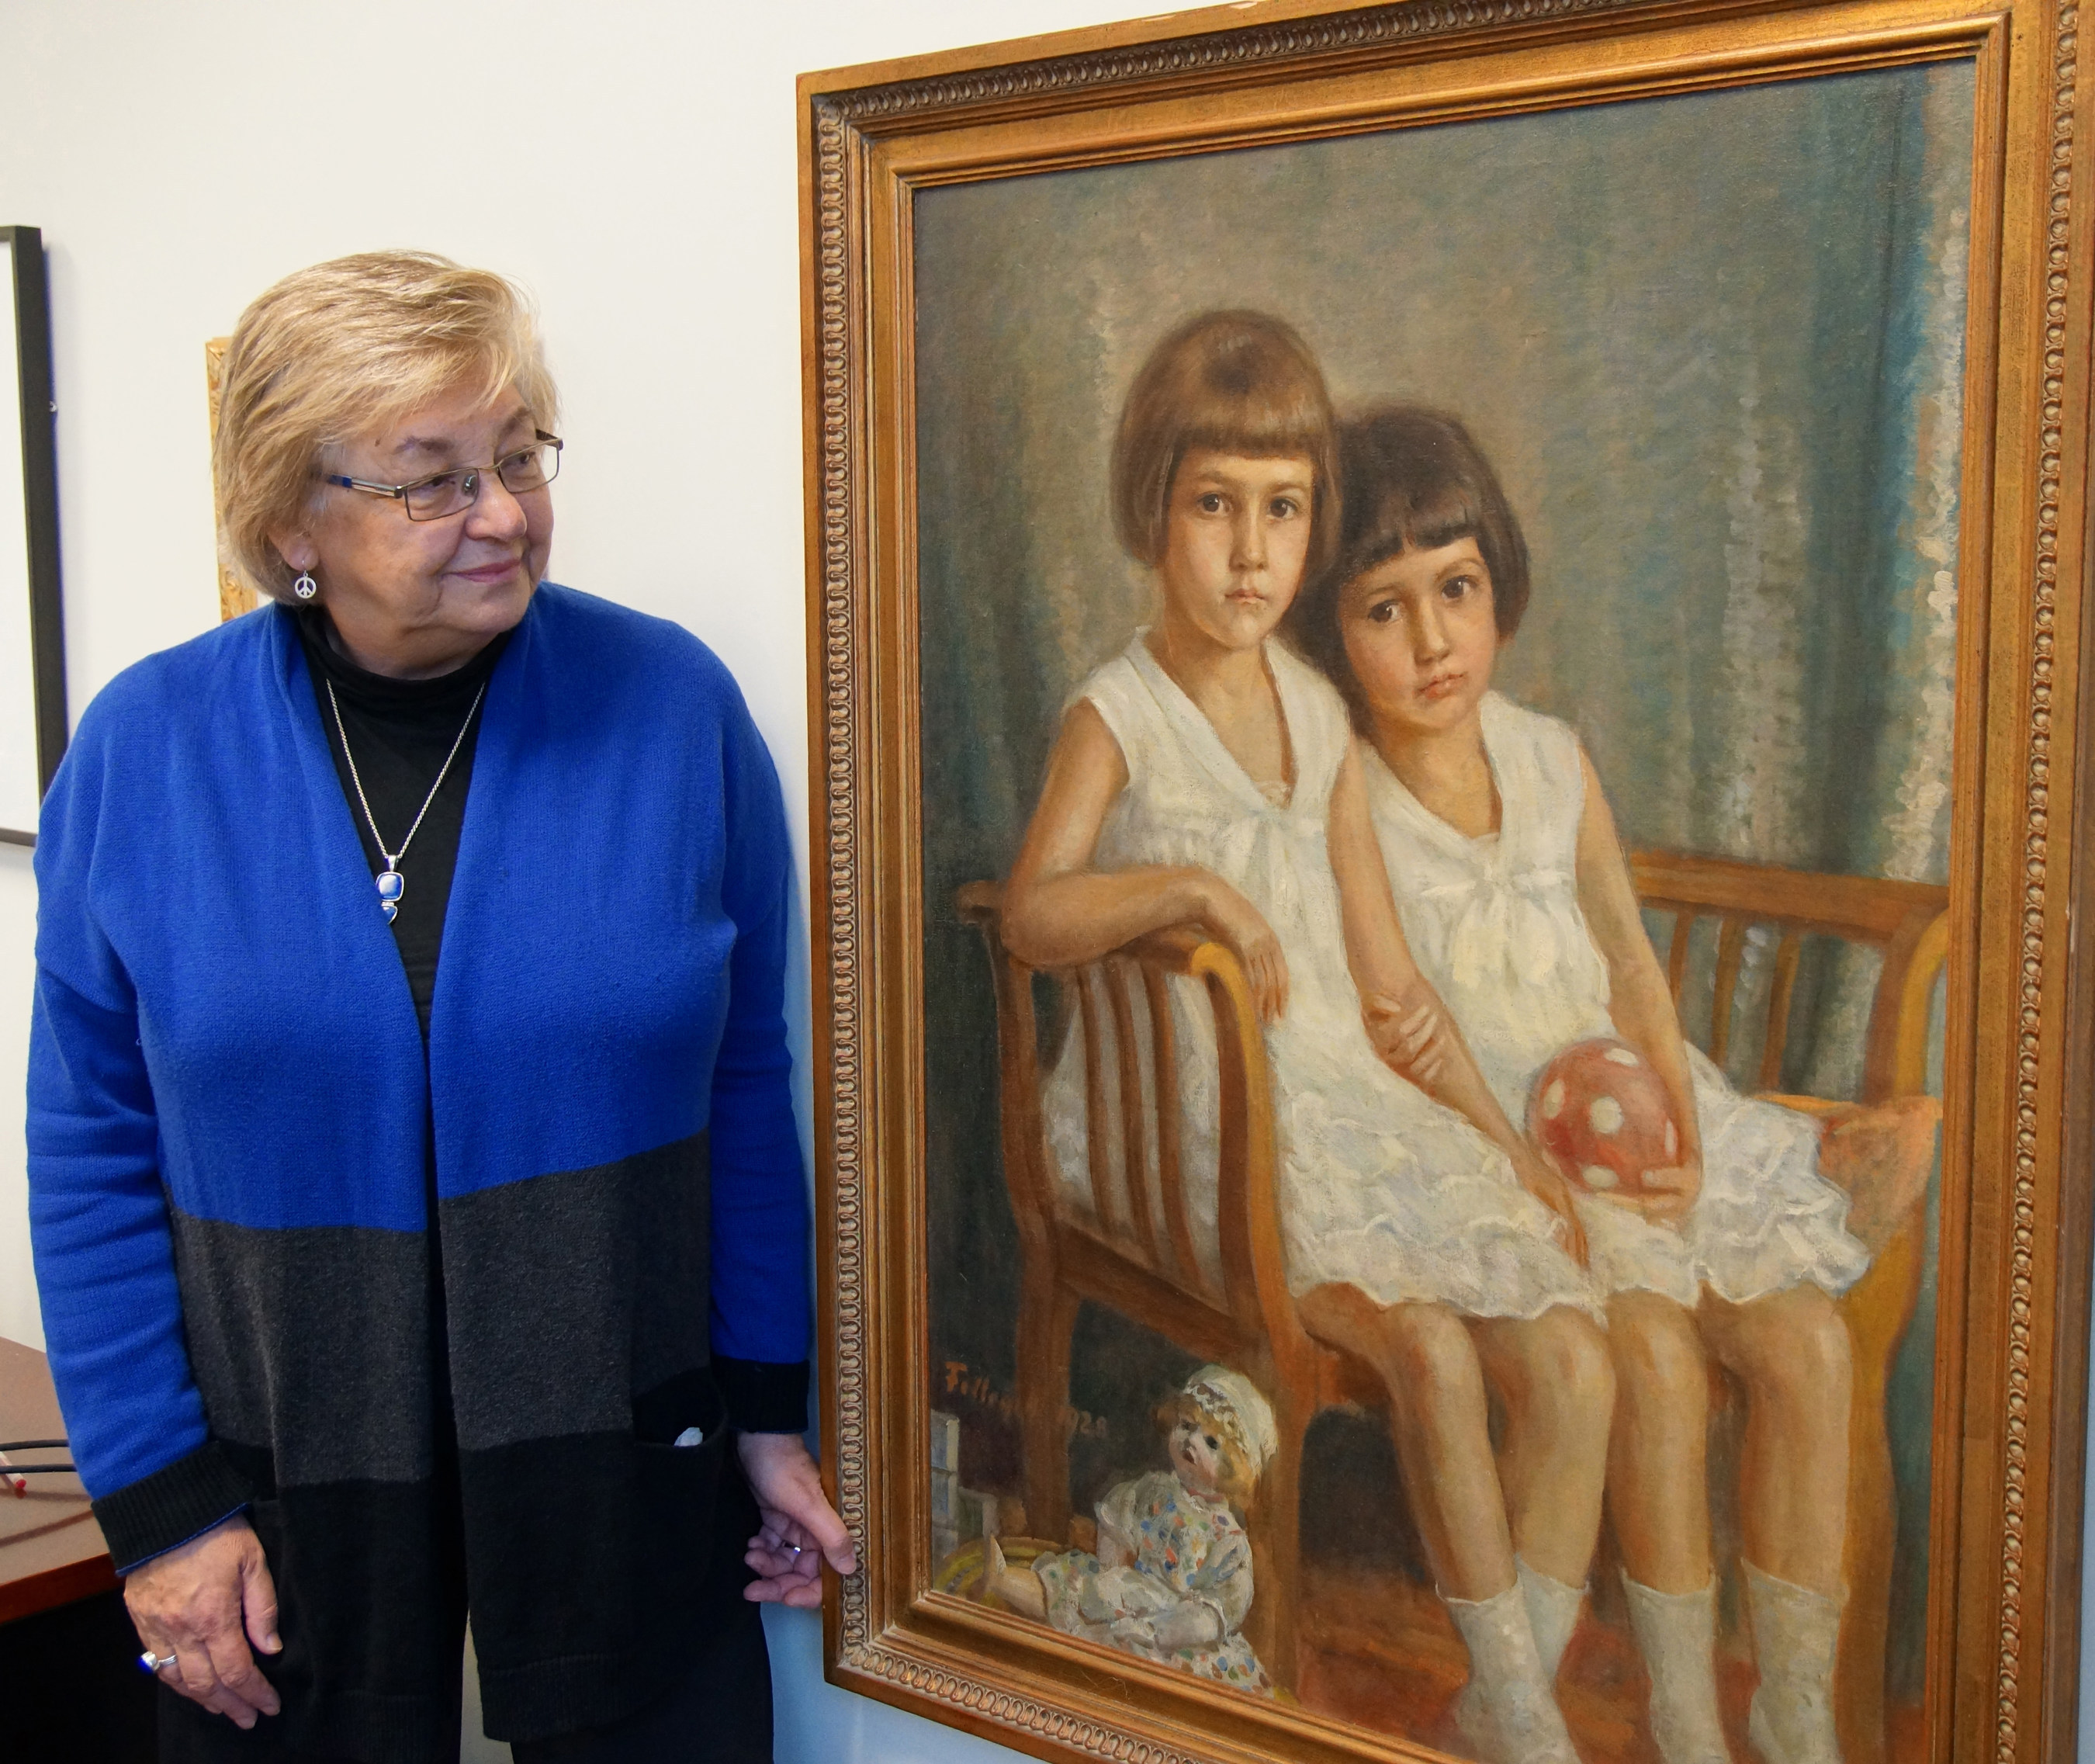 Susan Mikula, Ph.D., acting dean of the College of Liberal Arts at Benedictine University in Lisle, Illinois, stands next to a 1928 oil painting of her mother and aunt that hangs in her office.